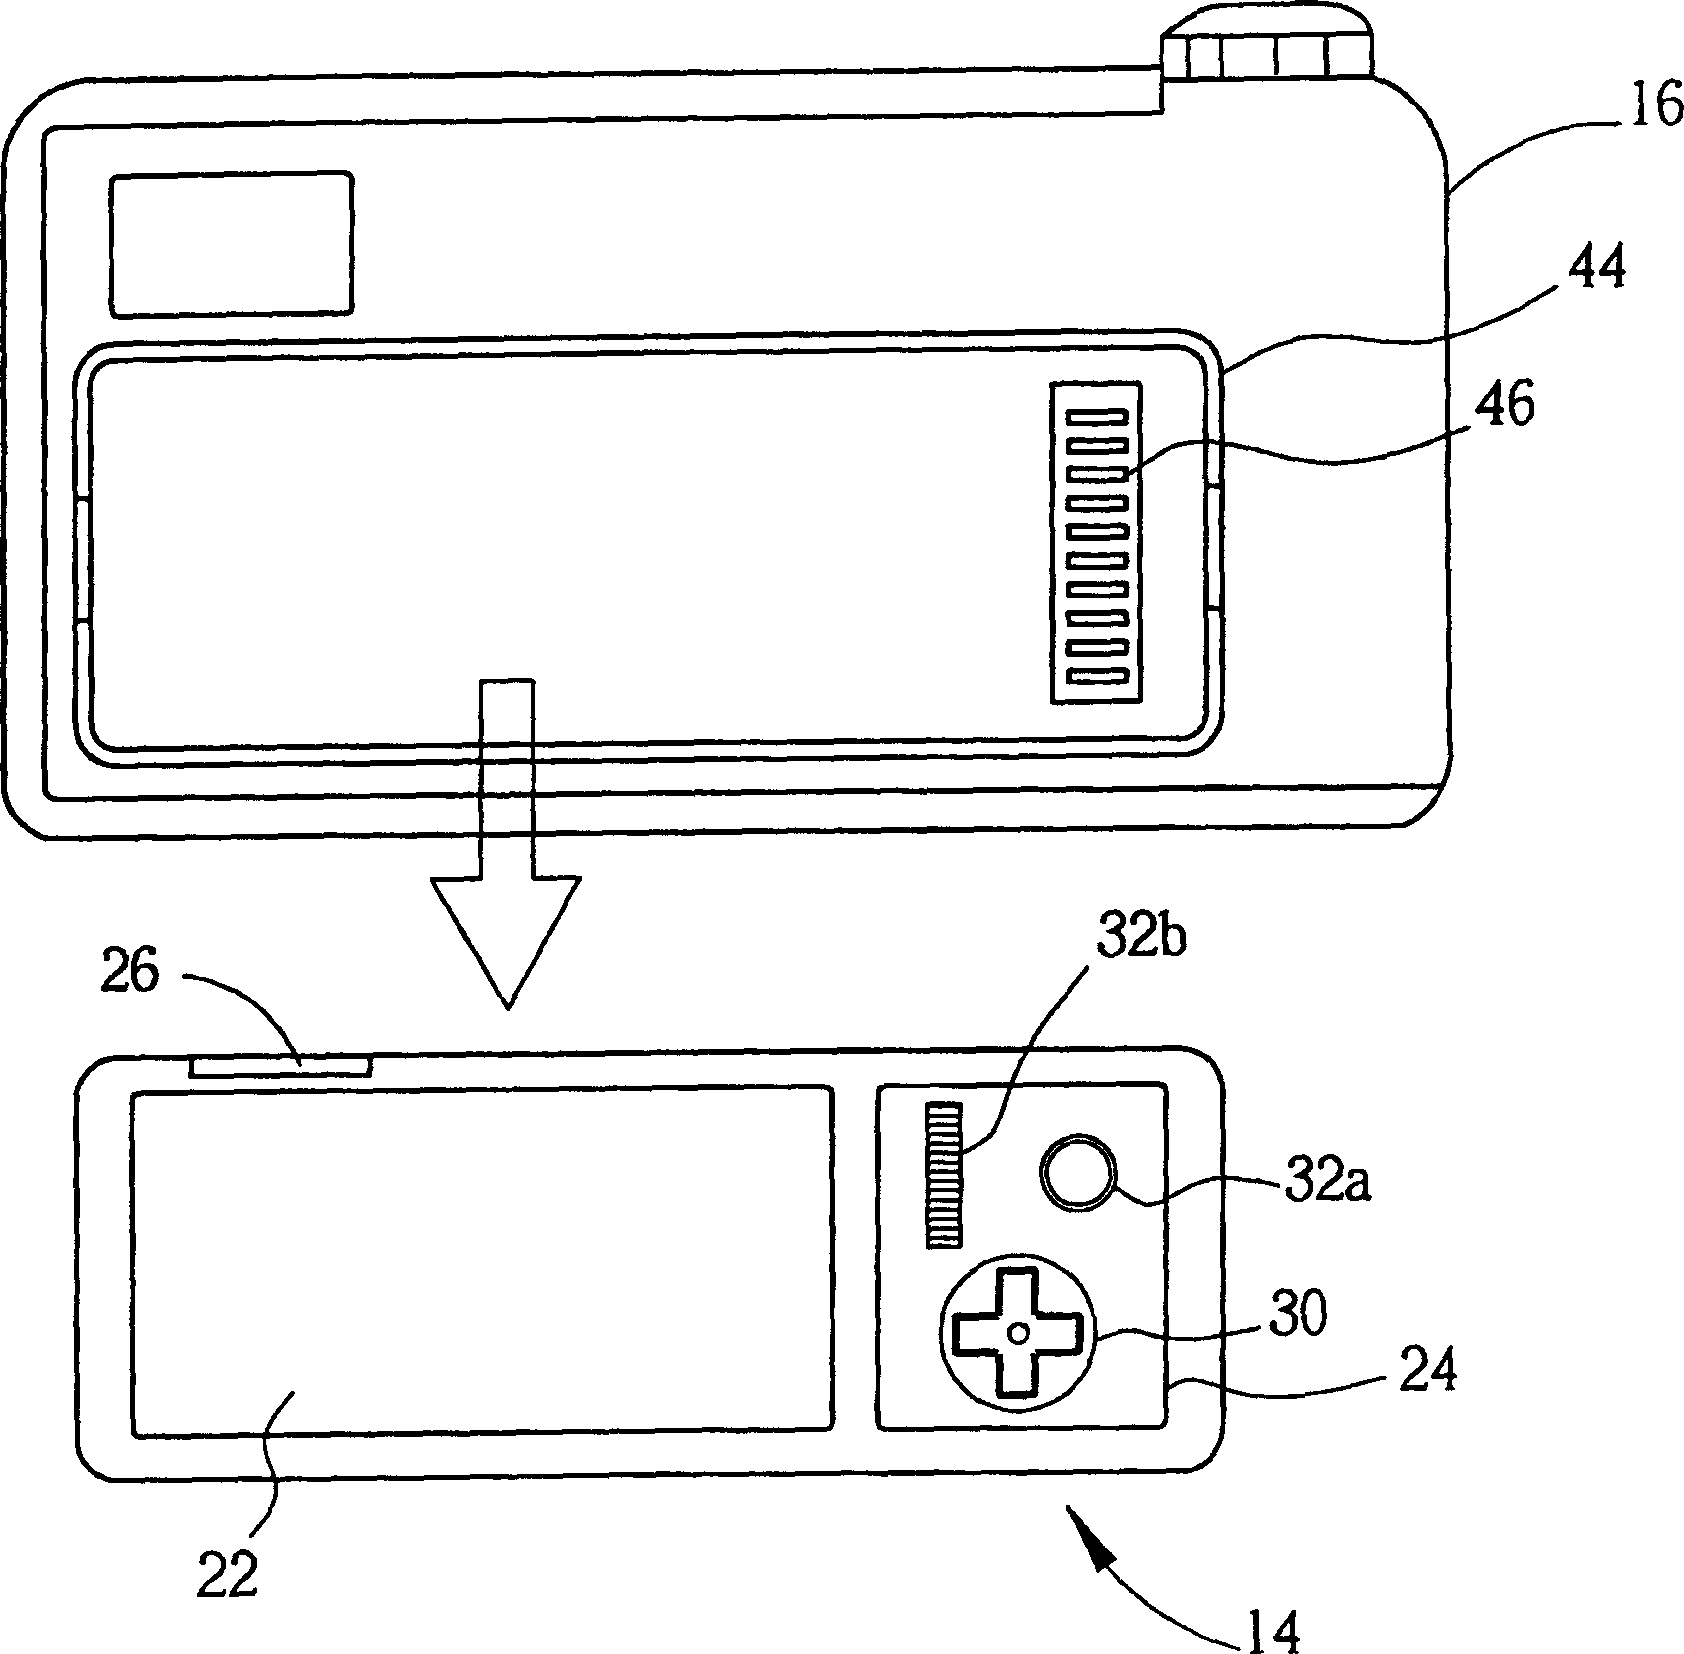 Image shooting system capable of using remote control device to change shooting angle